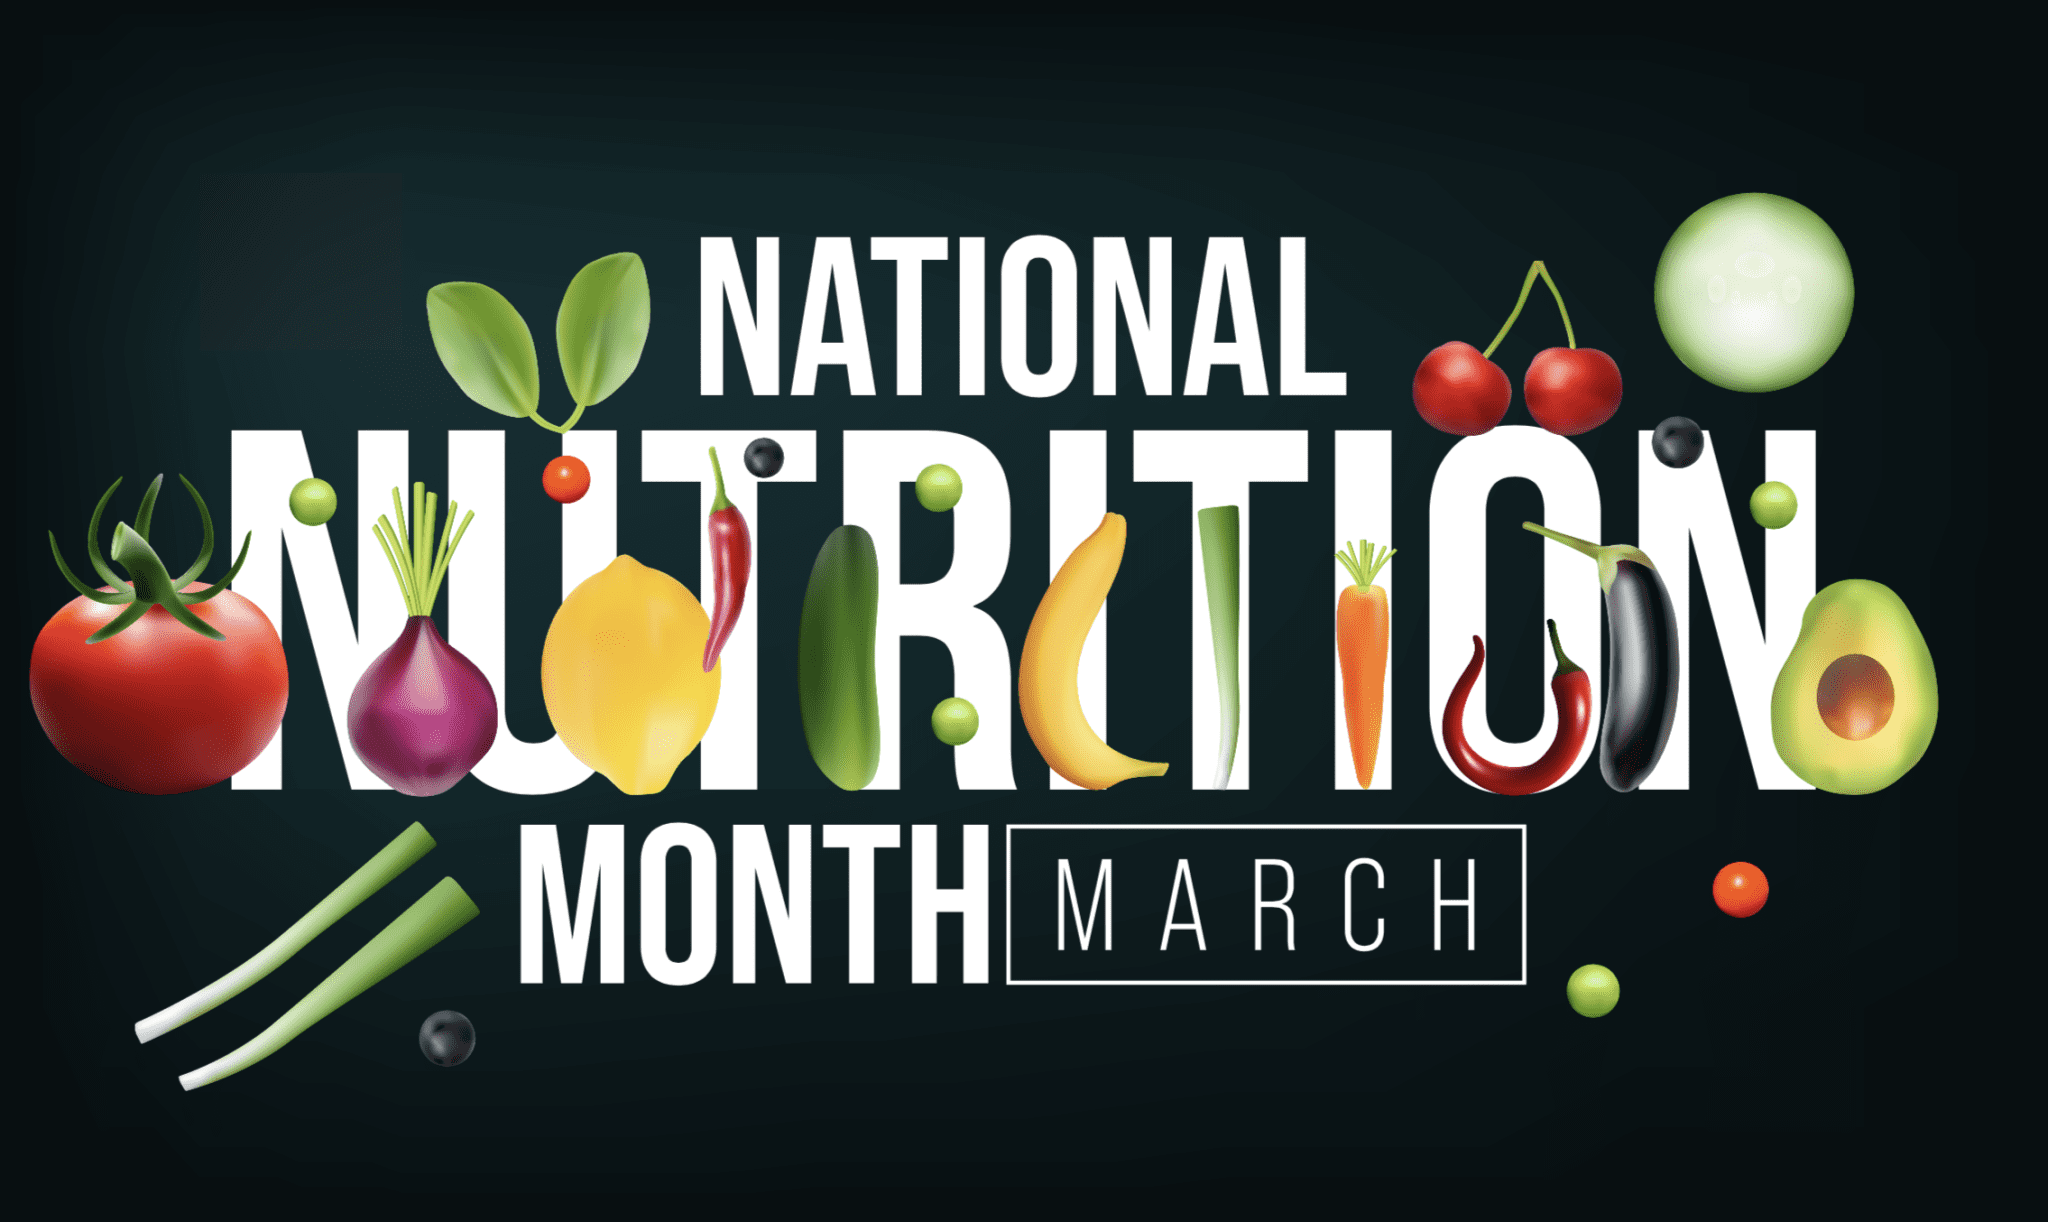 National Nutrition Month Graphic with fruit